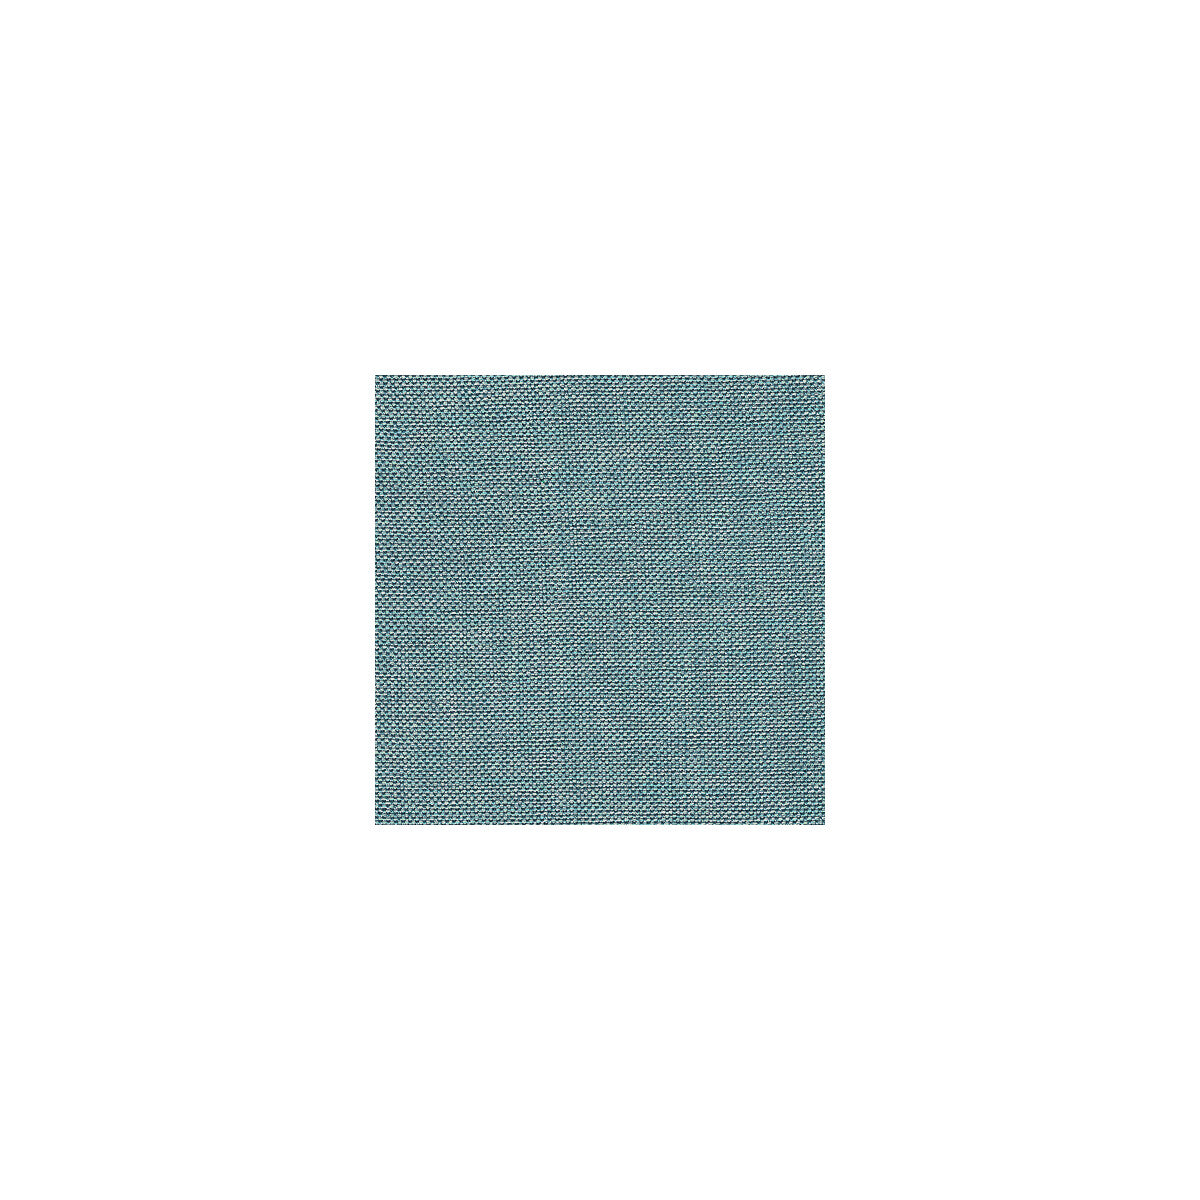 Kravet Basics fabric in 30299-5 color - pattern 30299.5.0 - by Kravet Basics in the Perfect Plains collection